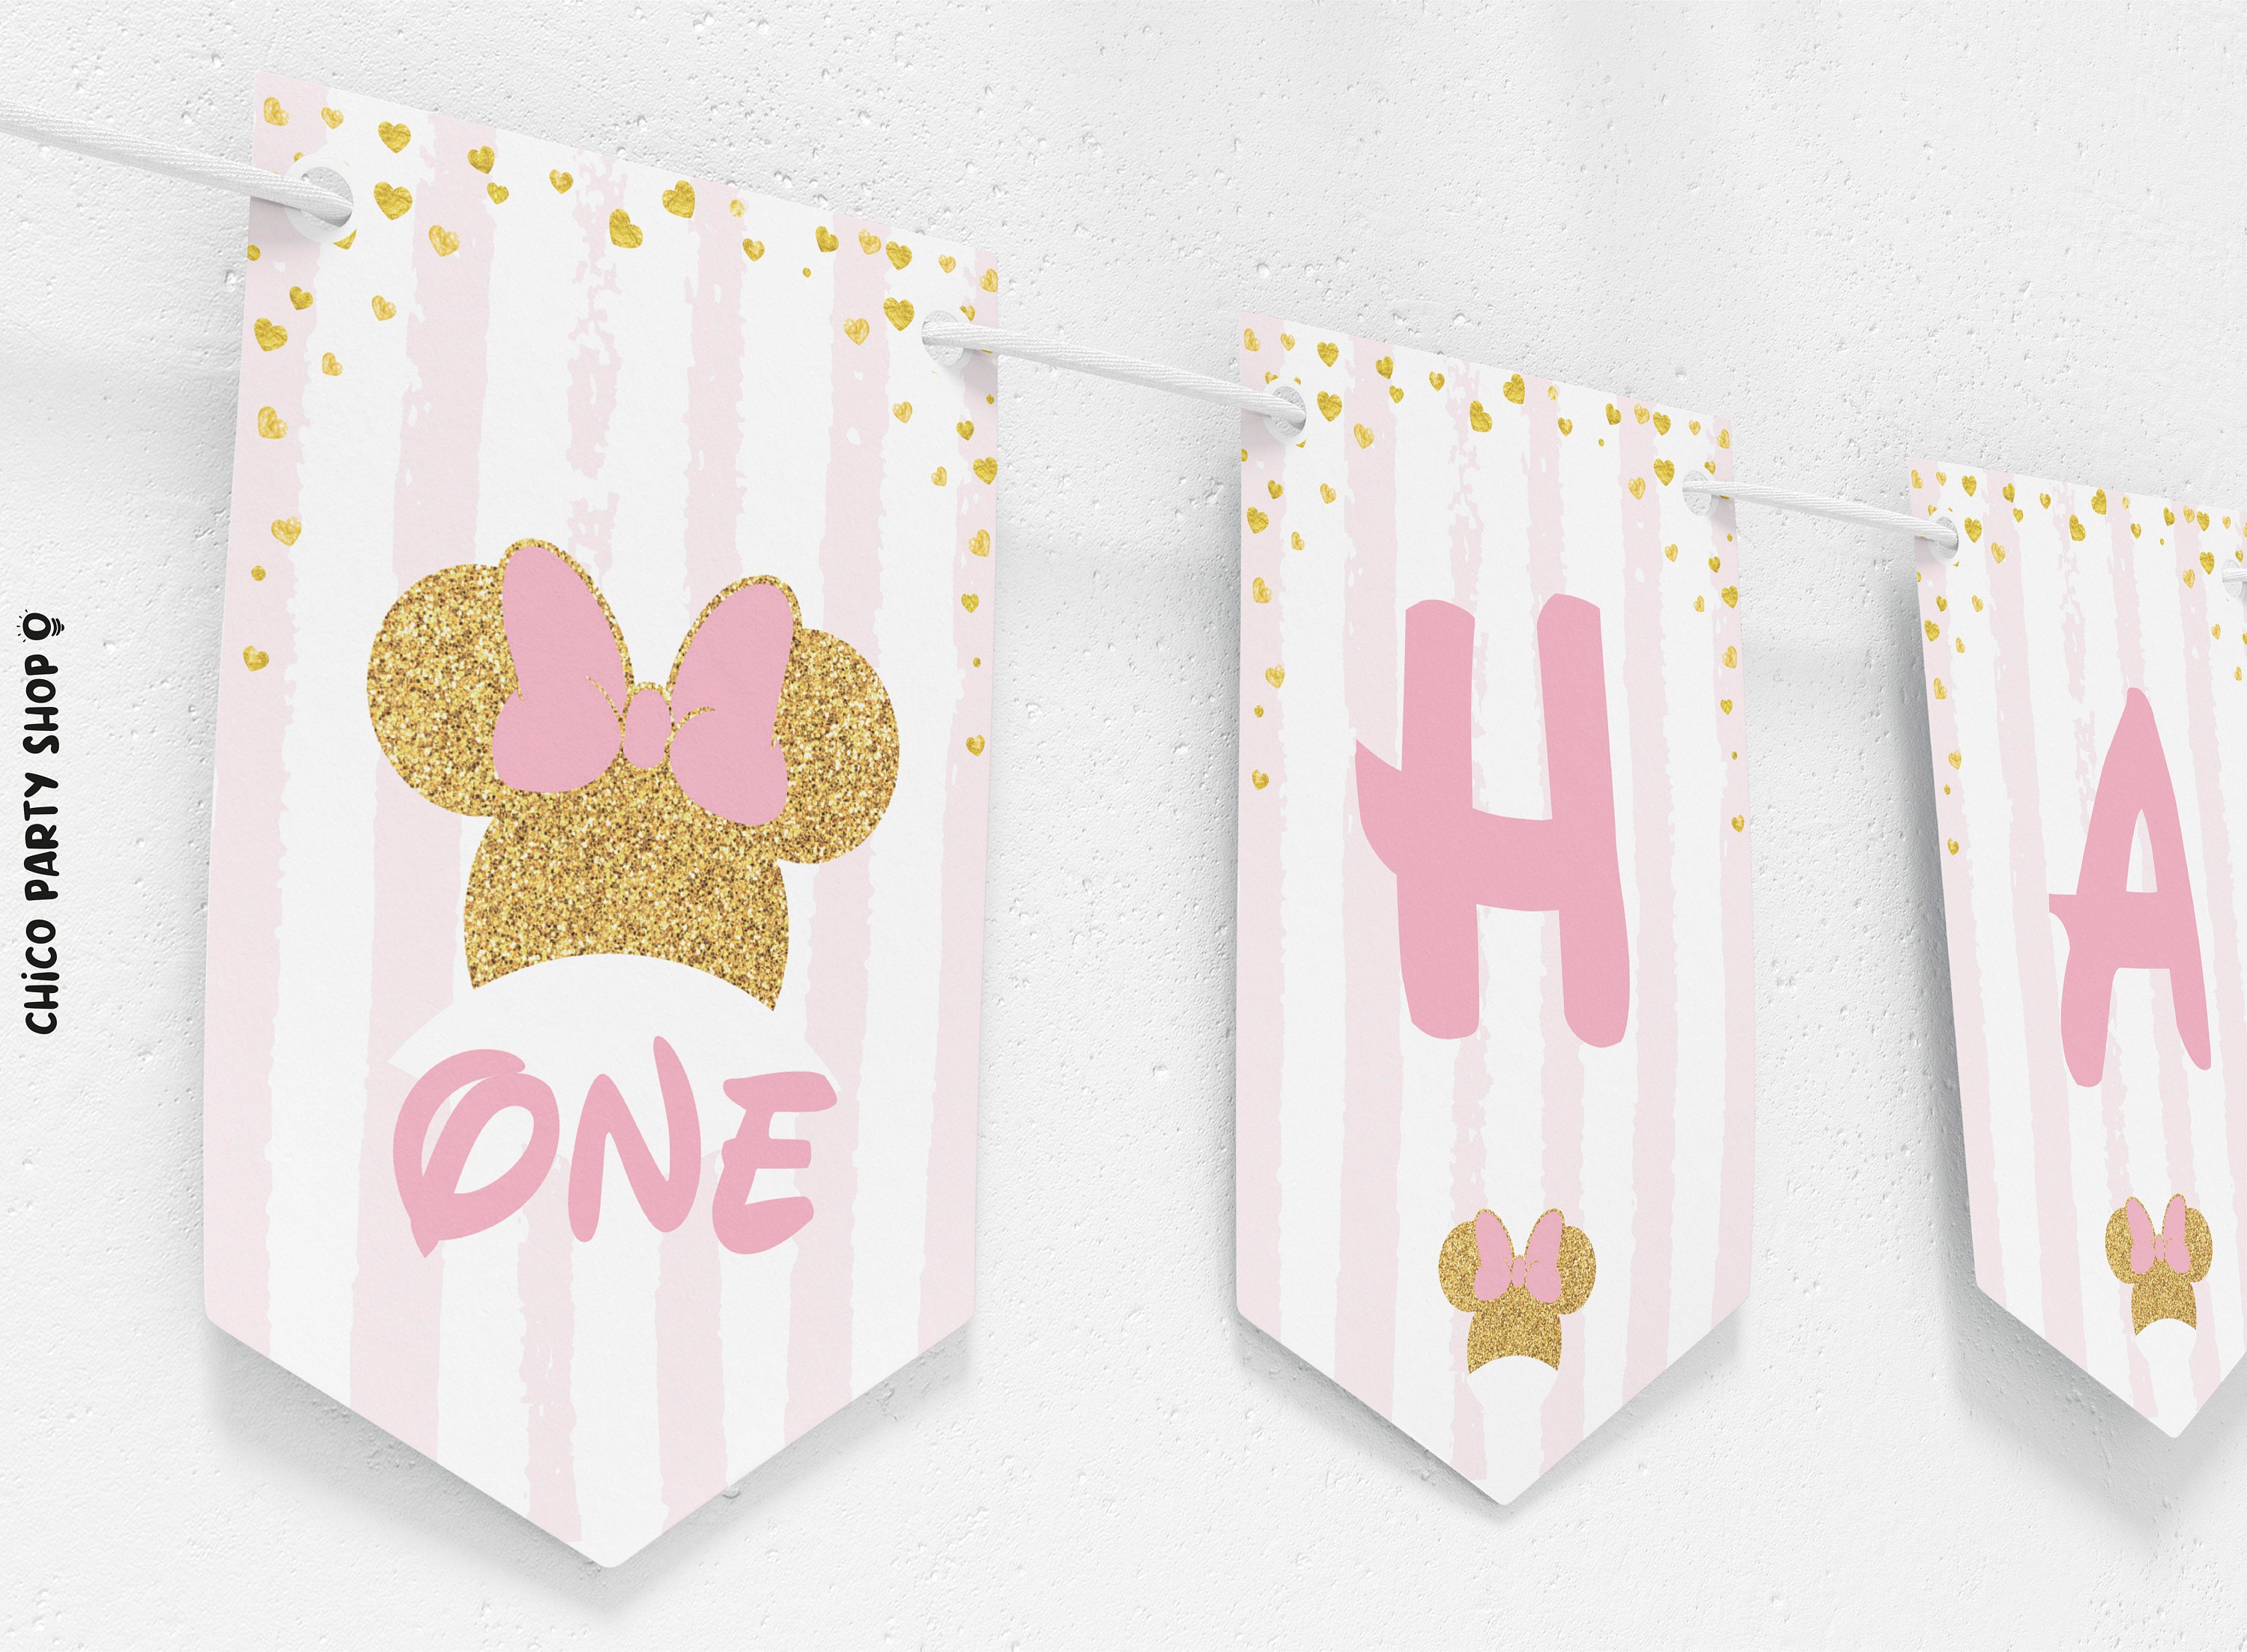 Mickey Minnie Mouse Party Supplies Banner Balloons Birthday Party Set  Decoration